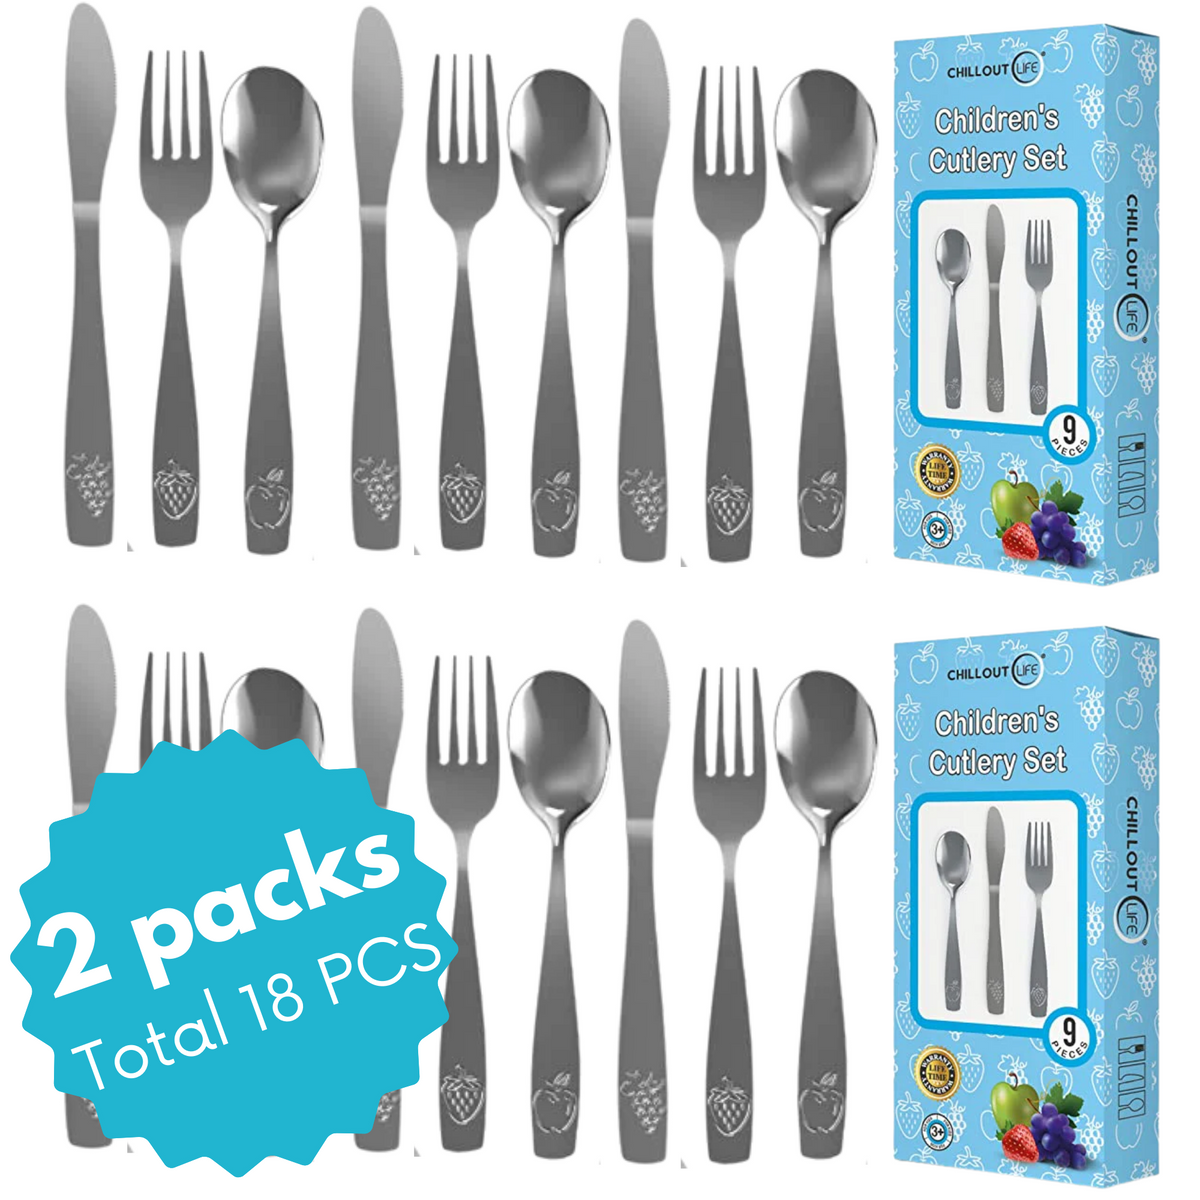 CHILLOUT LIFE 24 Piece Stainless Steel Kids Silverware Set (2 packs: 1